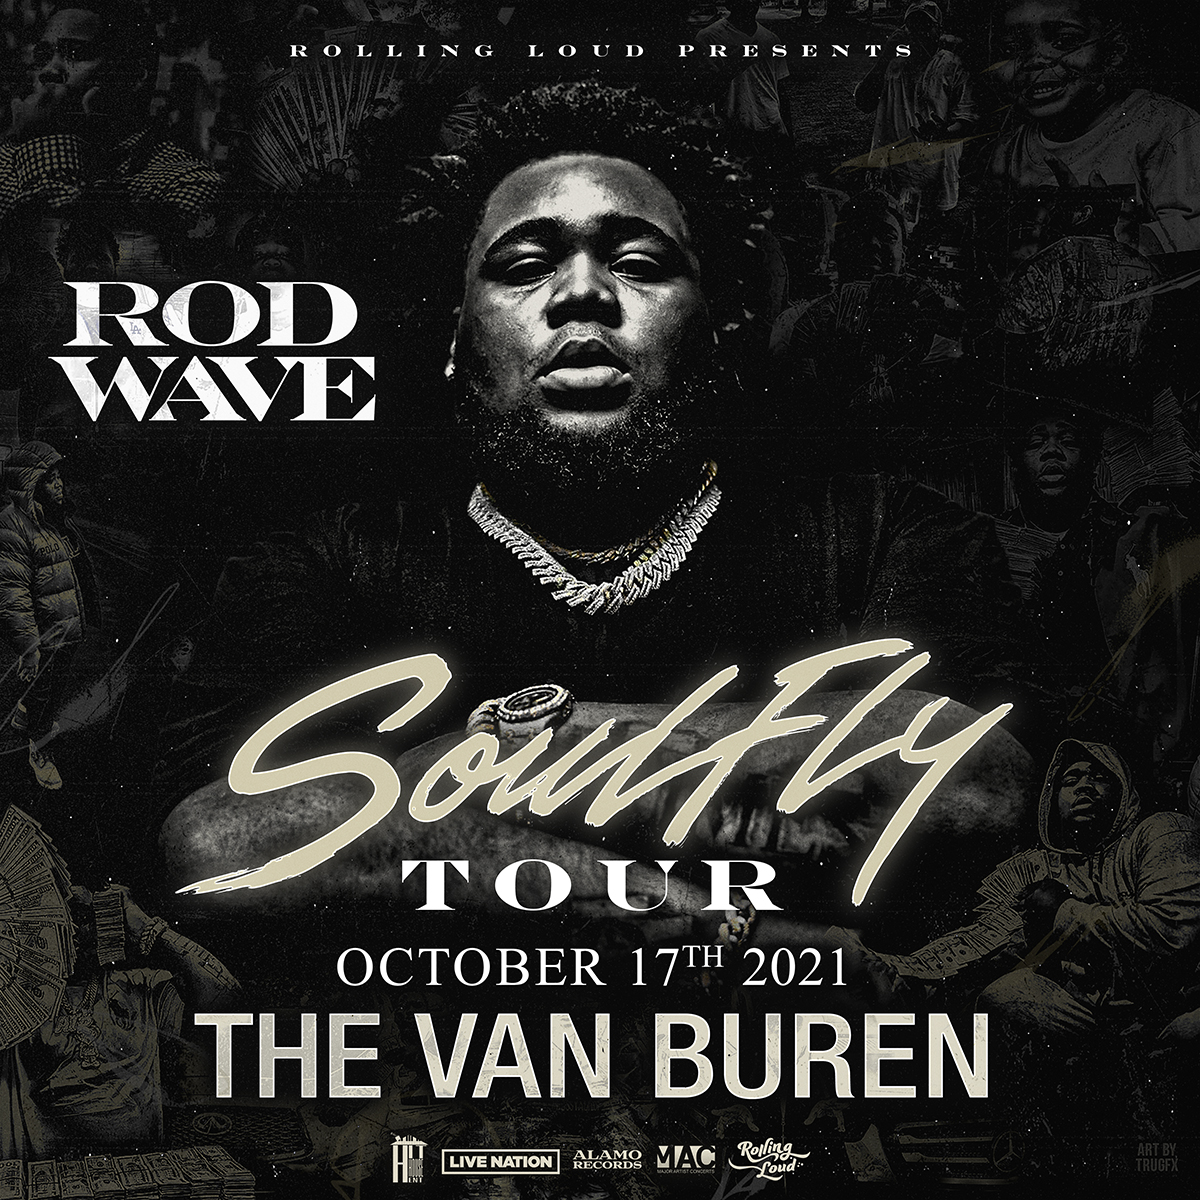 Rod Wave SoulFly Tour presented by Rolling Loud